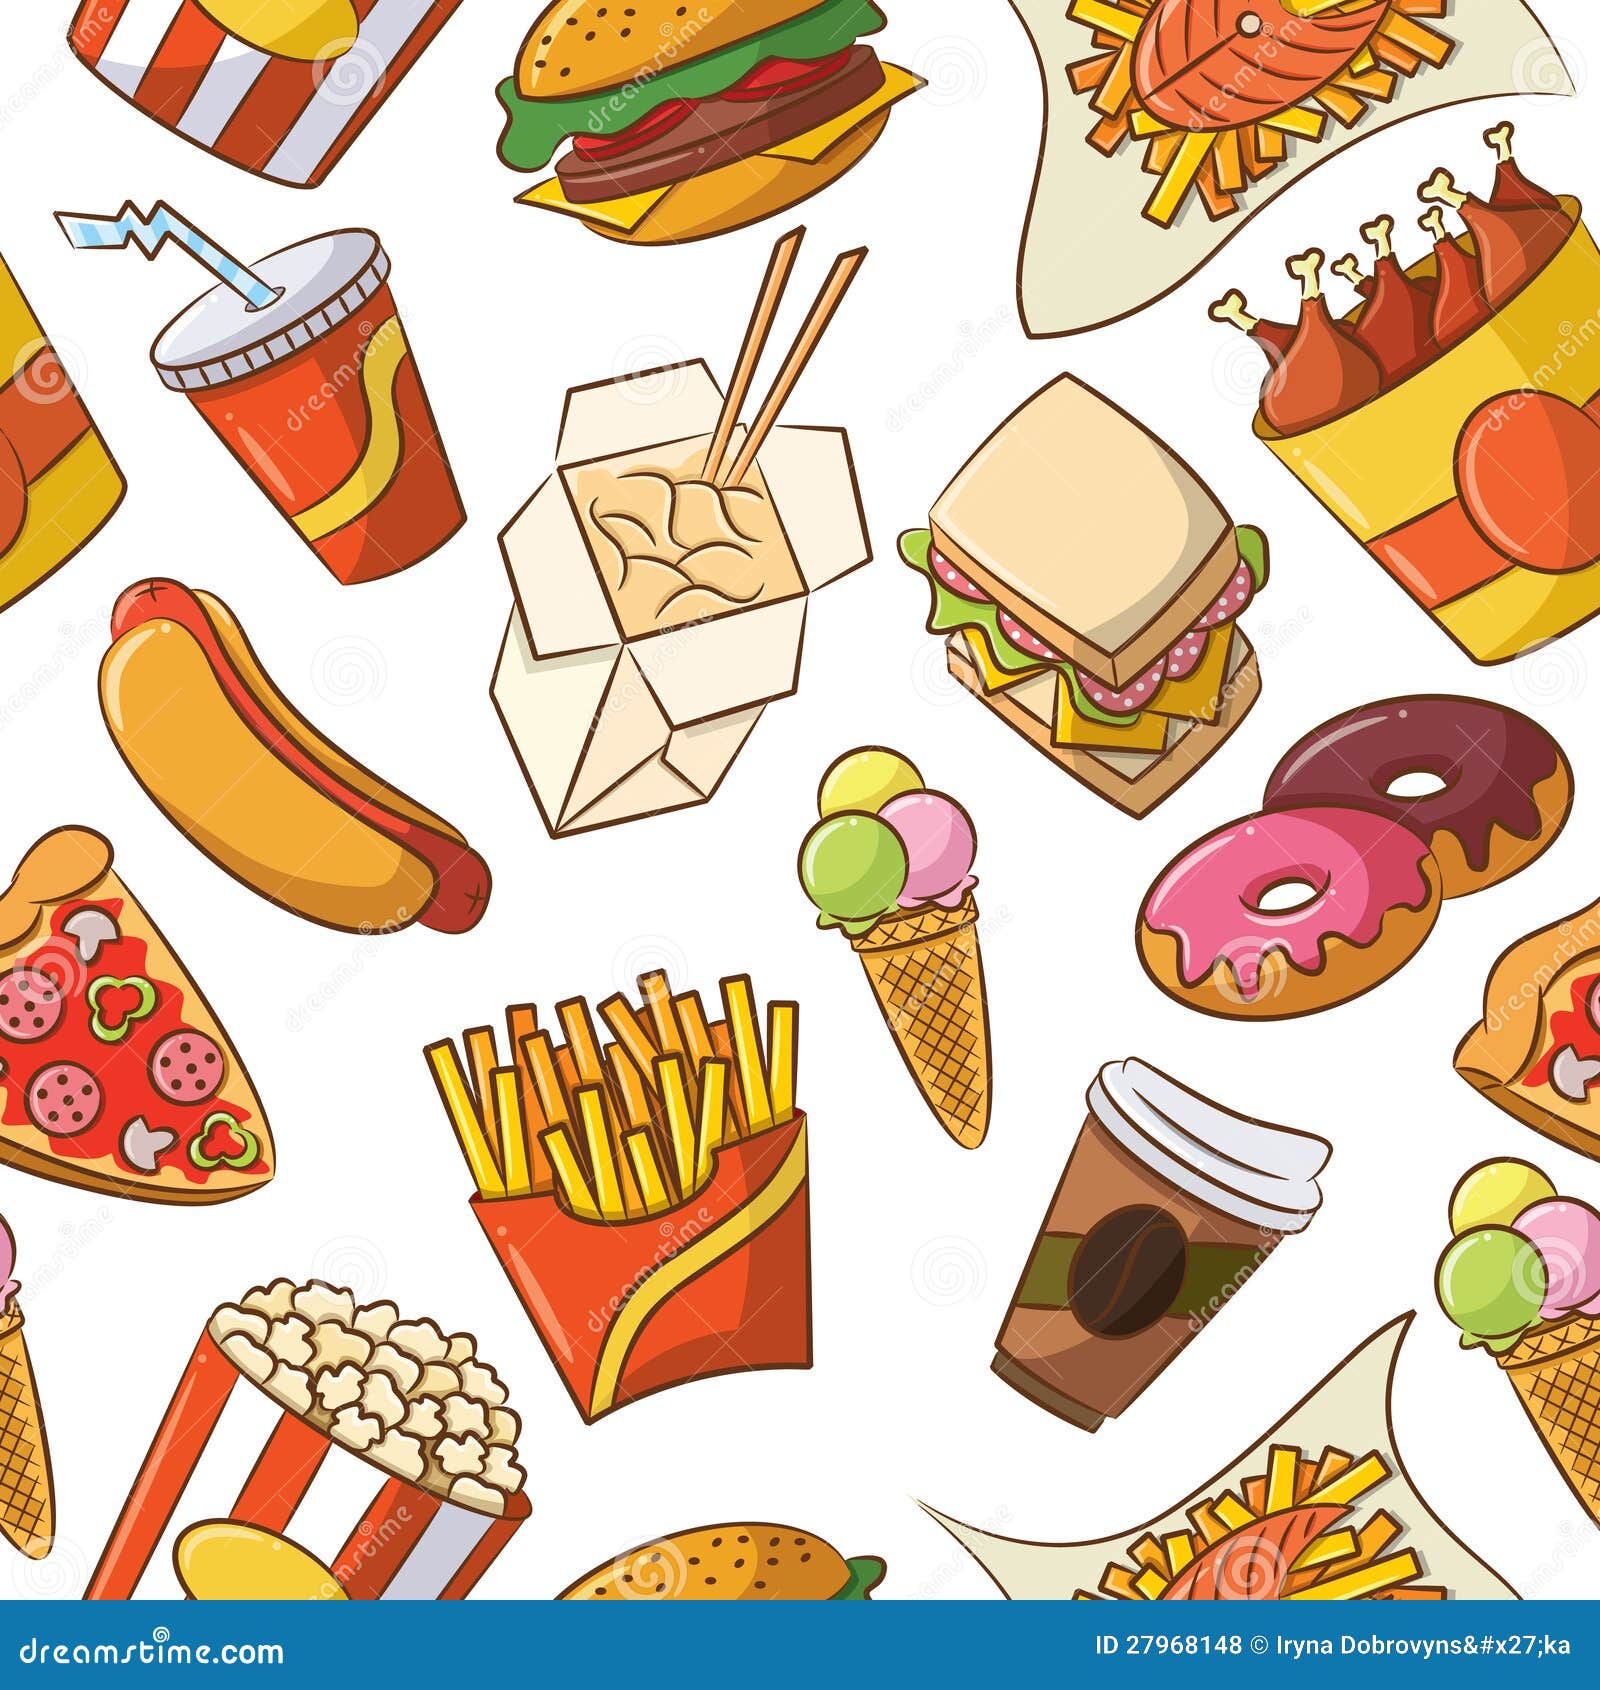 clipart pictures of junk food - photo #16